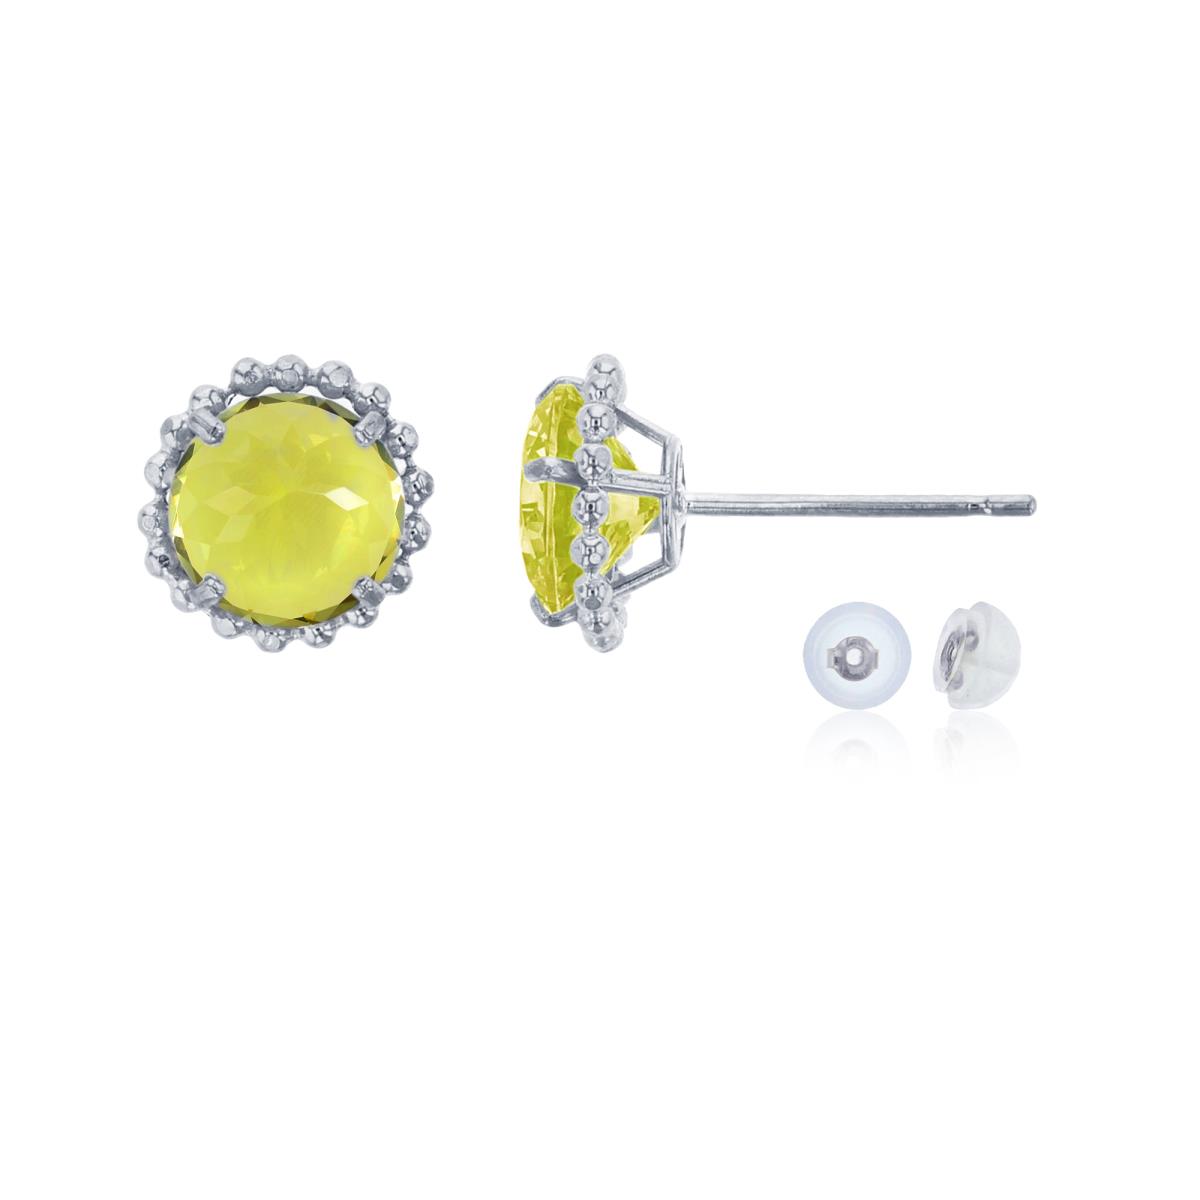 10K White Gold 5mm Rd Lemon Quartz with Bead Frame Stud Earring with Silicone Back